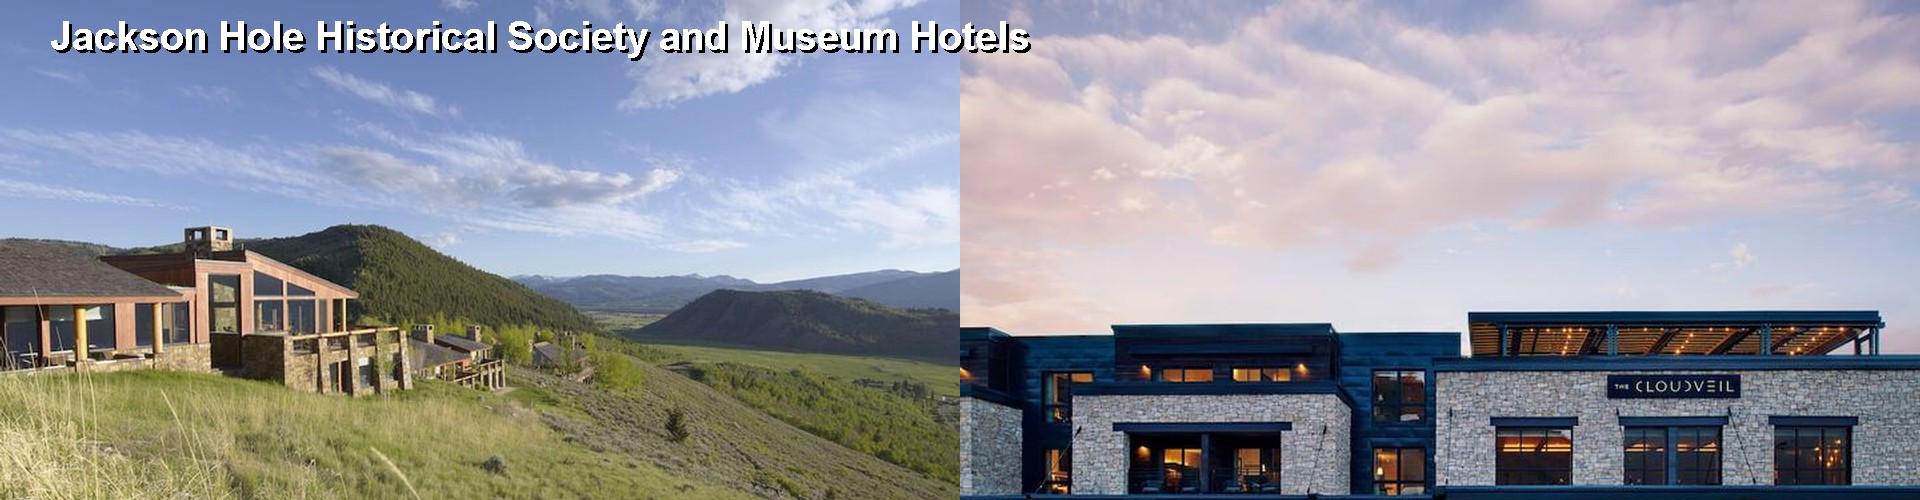 5 Best Hotels near Jackson Hole Historical Society and Museum